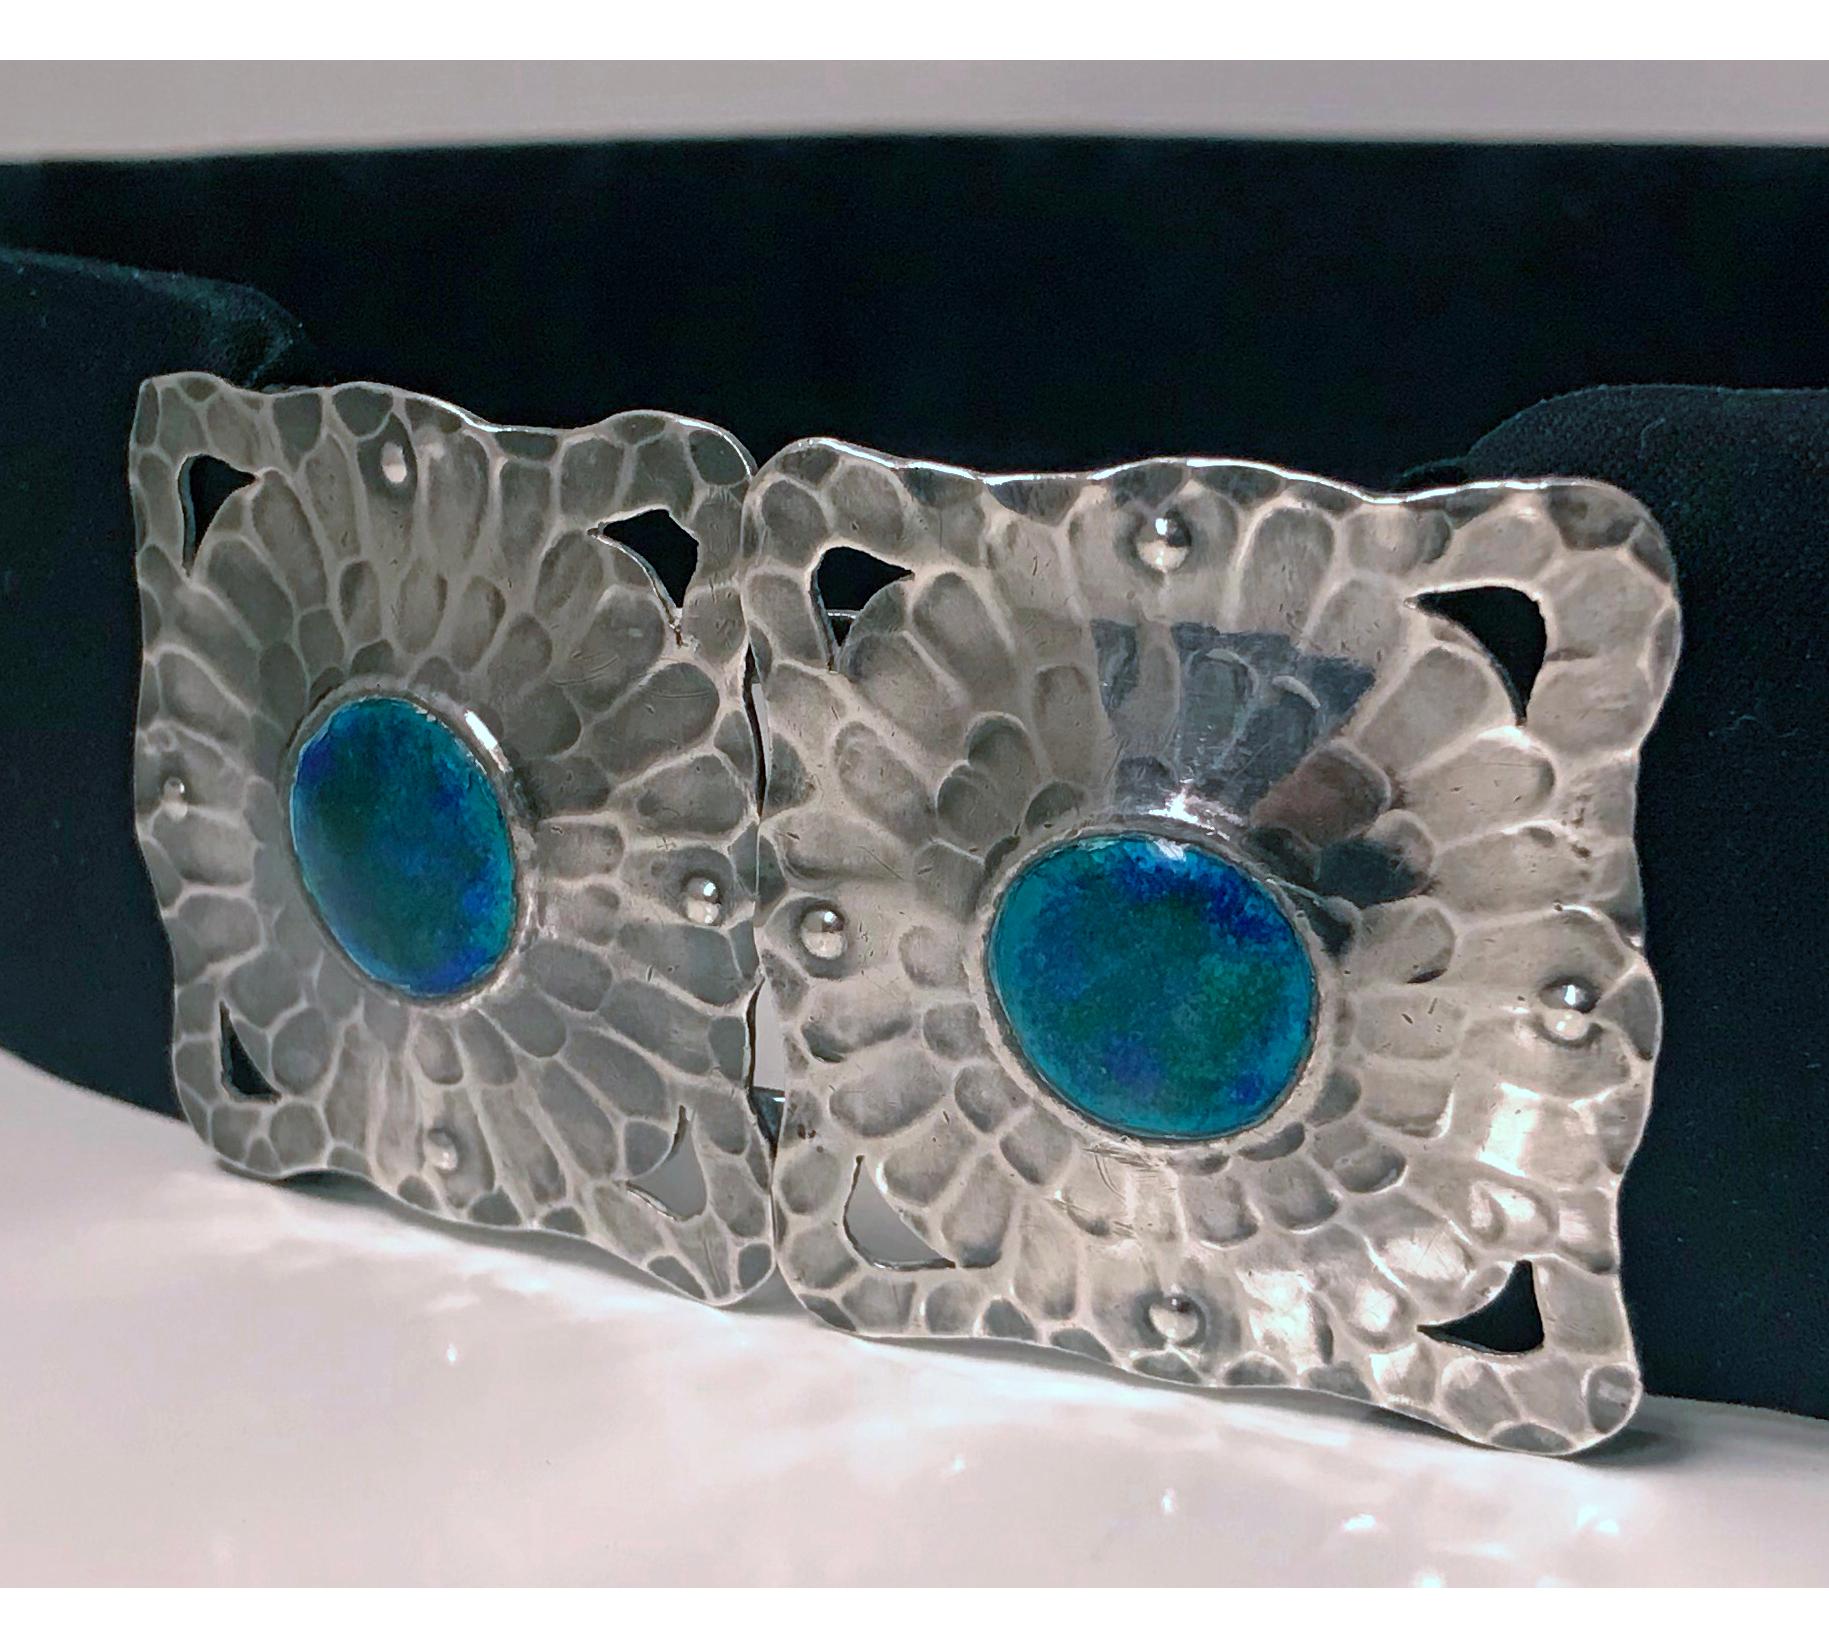 Liberty and Co Art Nouveau Arts and Crafts Silver Enamel Buckle. The rare design Sterling two piece enamel buckle waist clasp hallmarked Birmingham 1909 with Liberty mark. Dimensional hammered cut out design with a large turquoise blue green raised